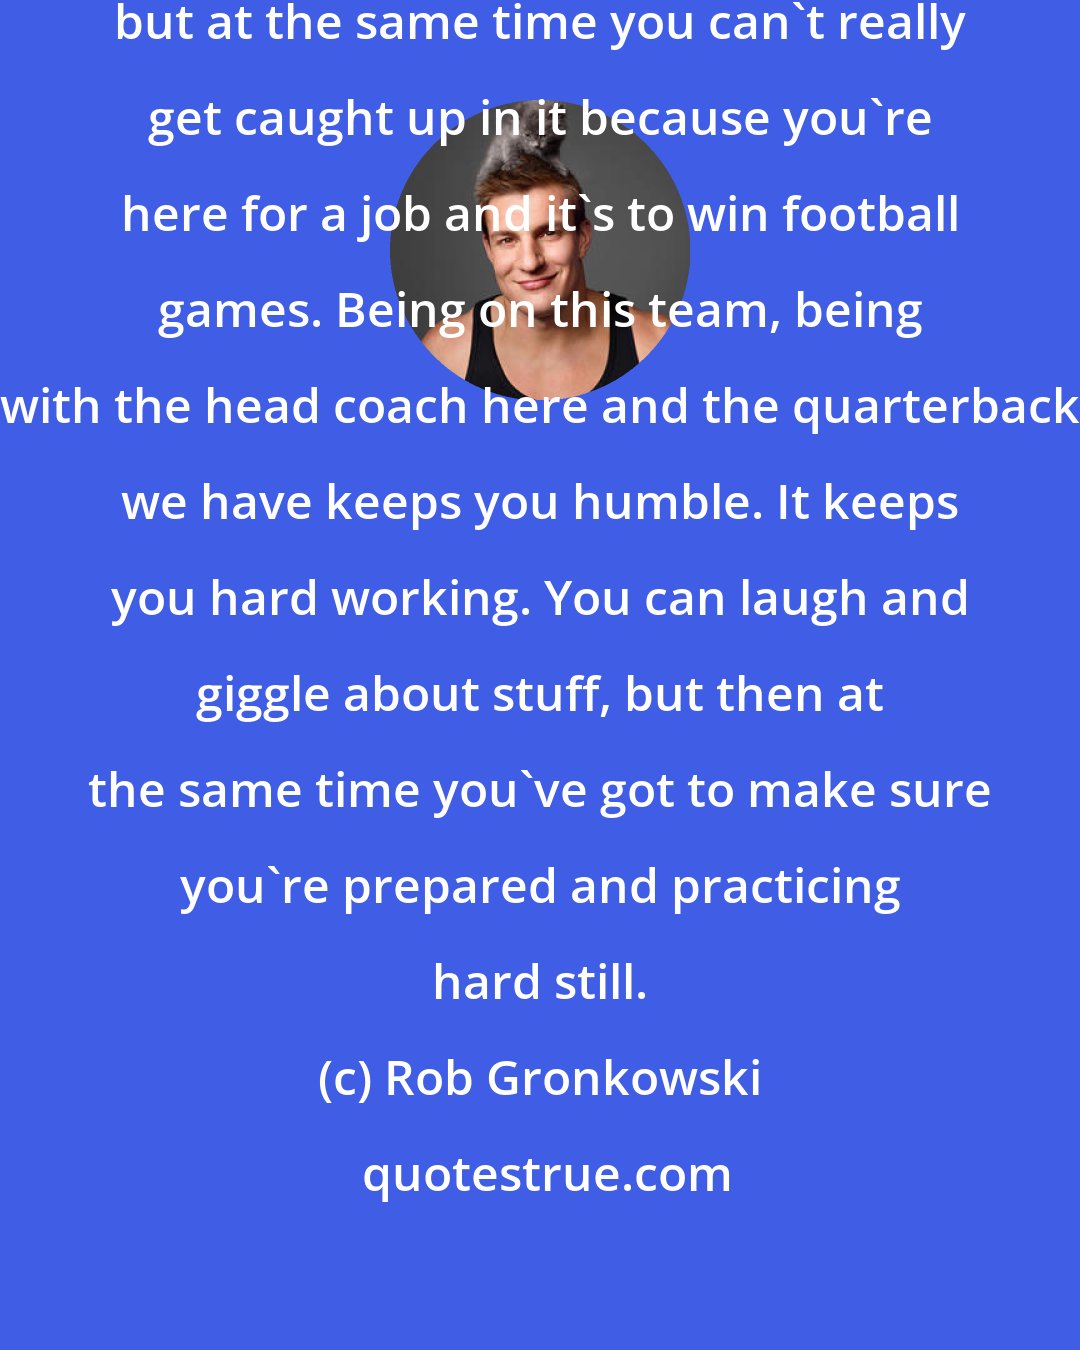 Rob Gronkowski: It's cool. You can laugh about it, but at the same time you can't really get caught up in it because you're here for a job and it's to win football games. Being on this team, being with the head coach here and the quarterback we have keeps you humble. It keeps you hard working. You can laugh and giggle about stuff, but then at the same time you've got to make sure you're prepared and practicing hard still.